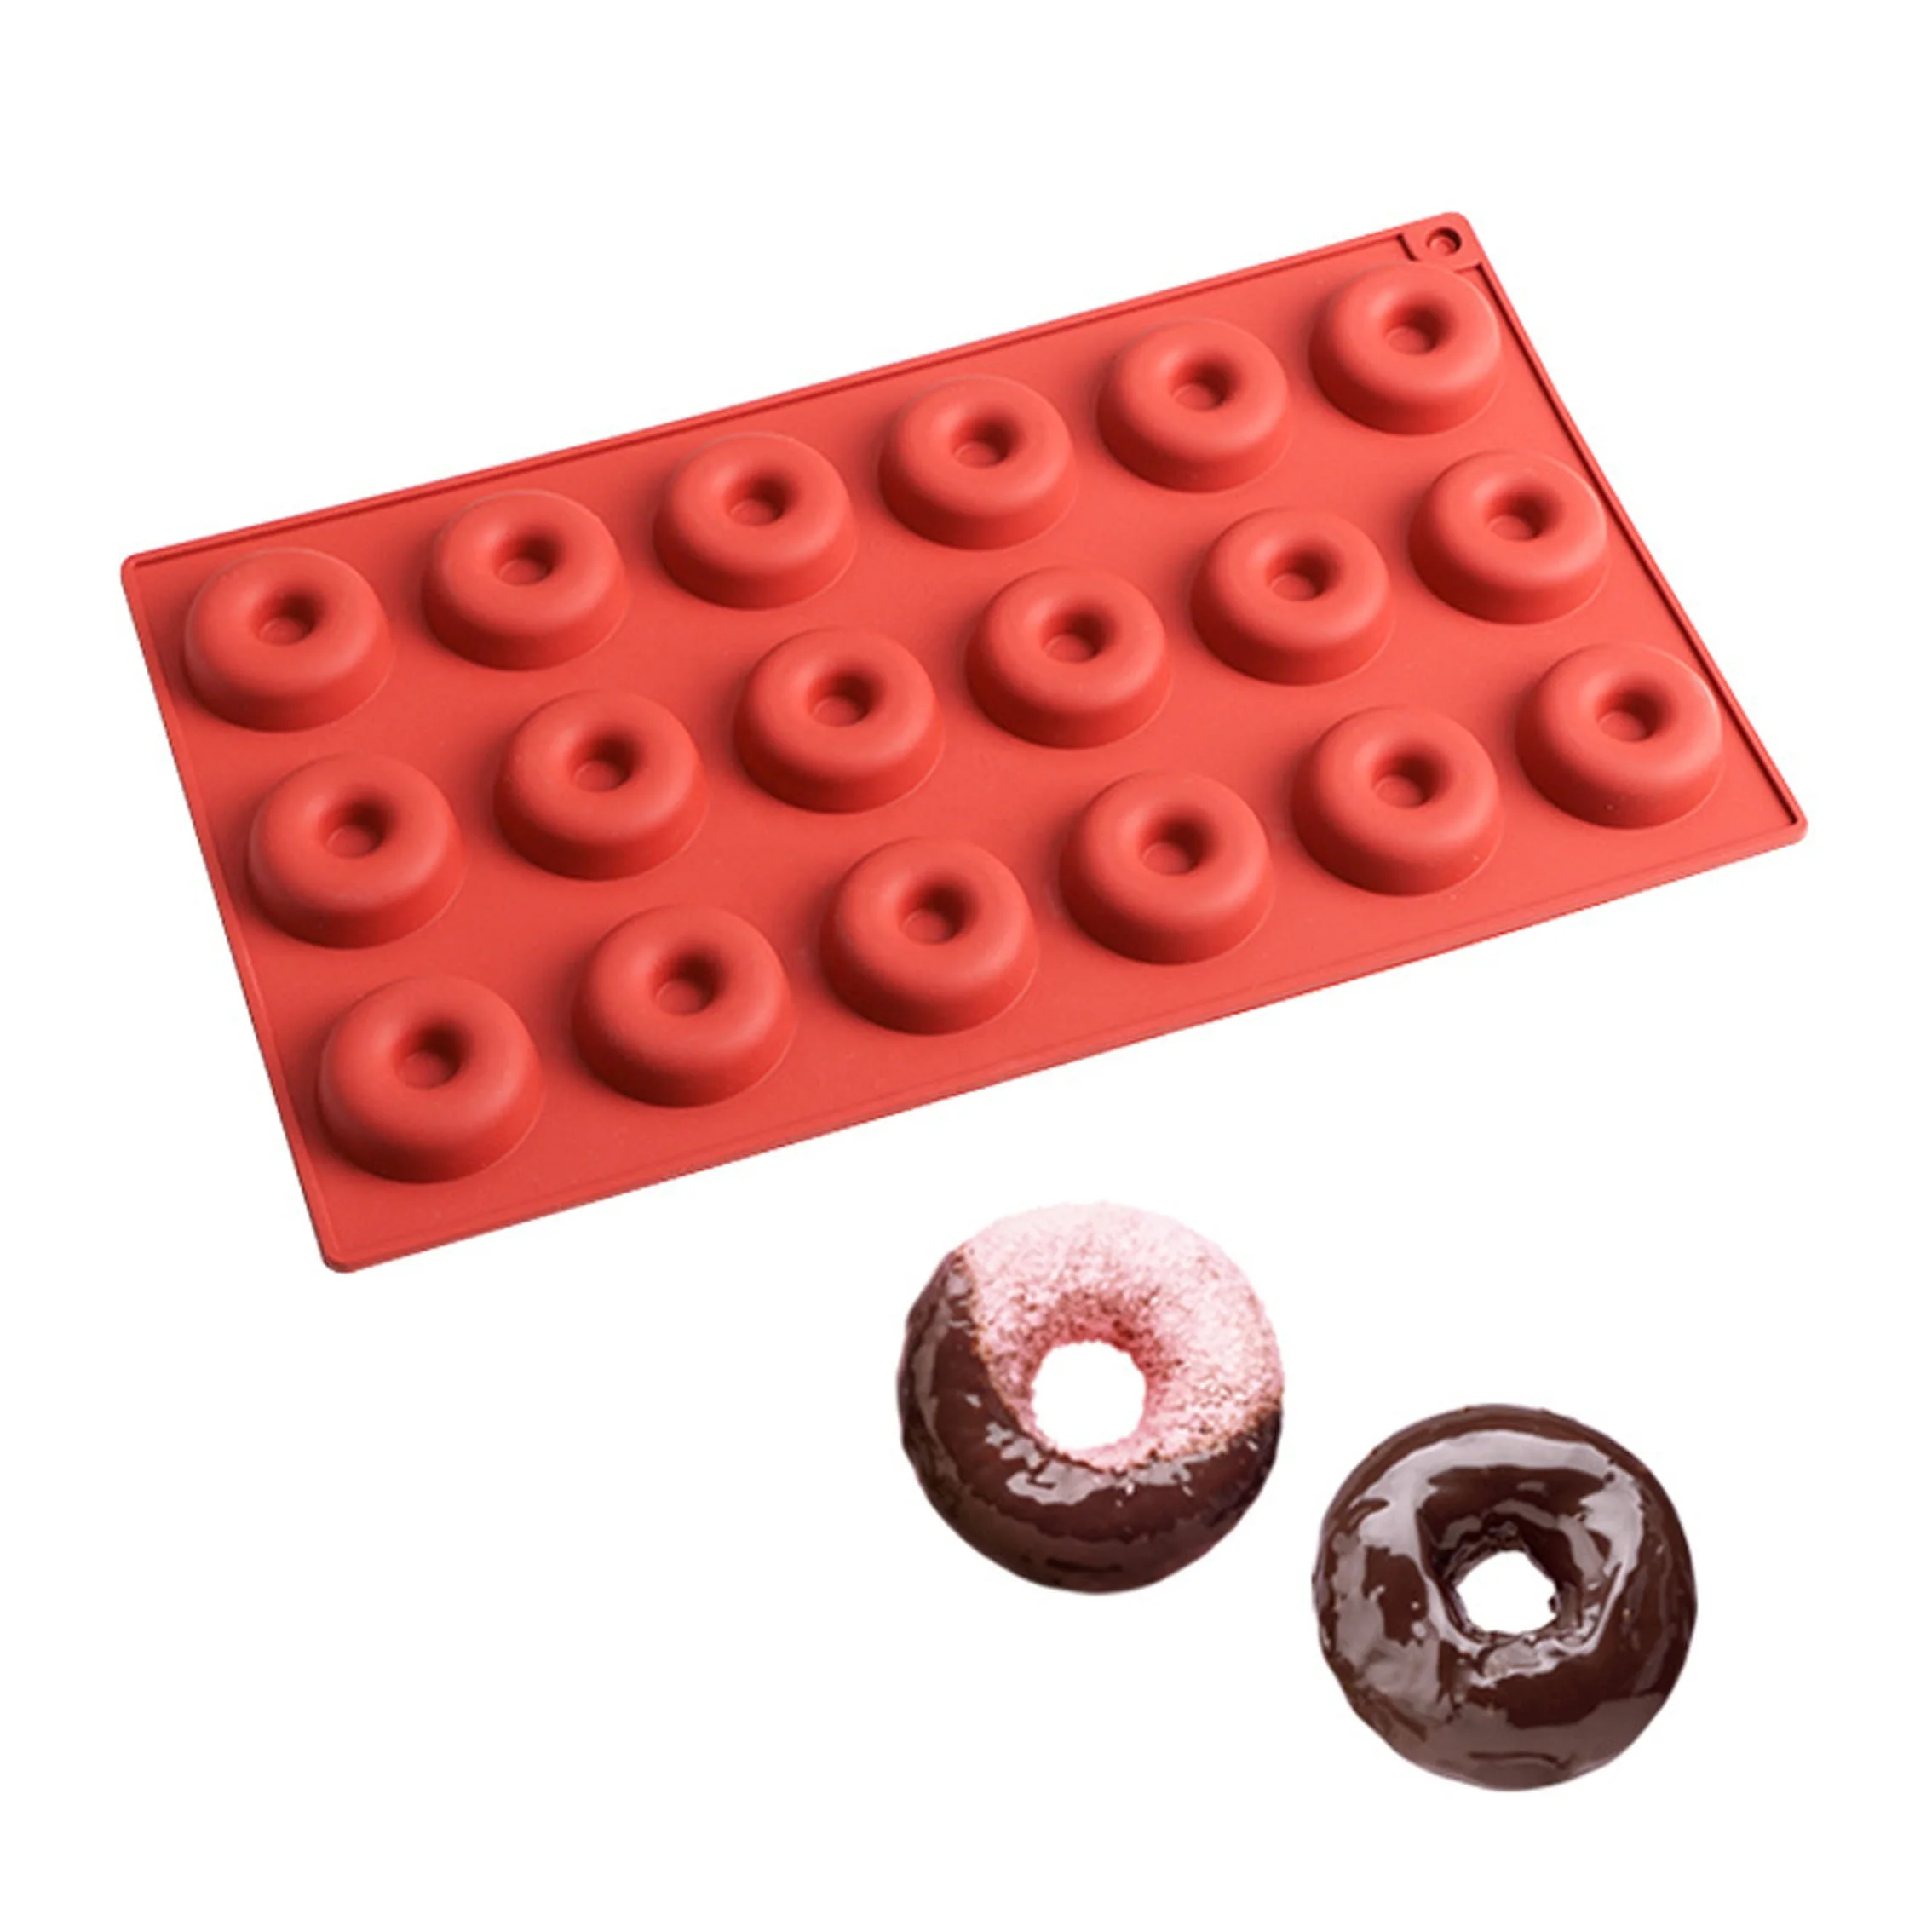 

Amazon Hot Selling 18 Round Holes Cake Mold Mini Donut Silicone Mold 3D Soap Mould Diy Bake Cake Stand Series, Pink